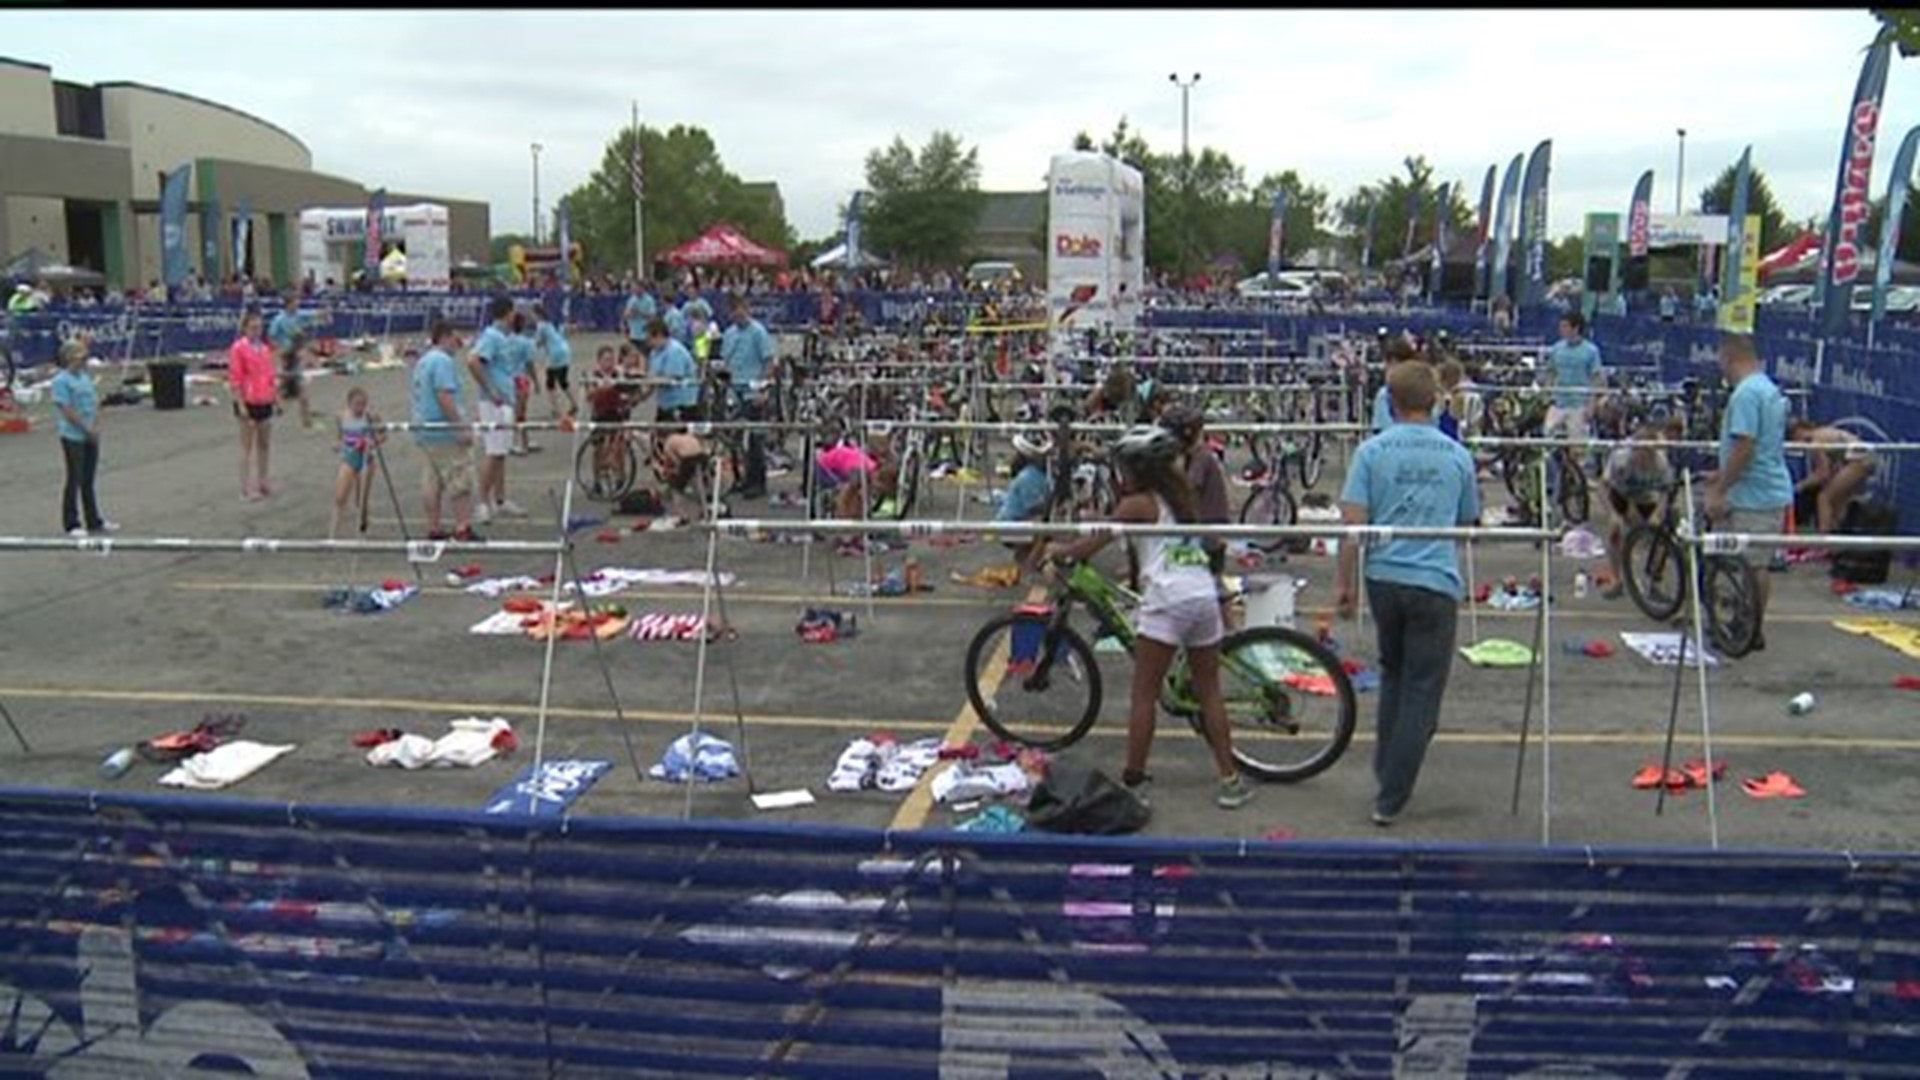 Record turnout at Hy-Vee Kids` Triathlon